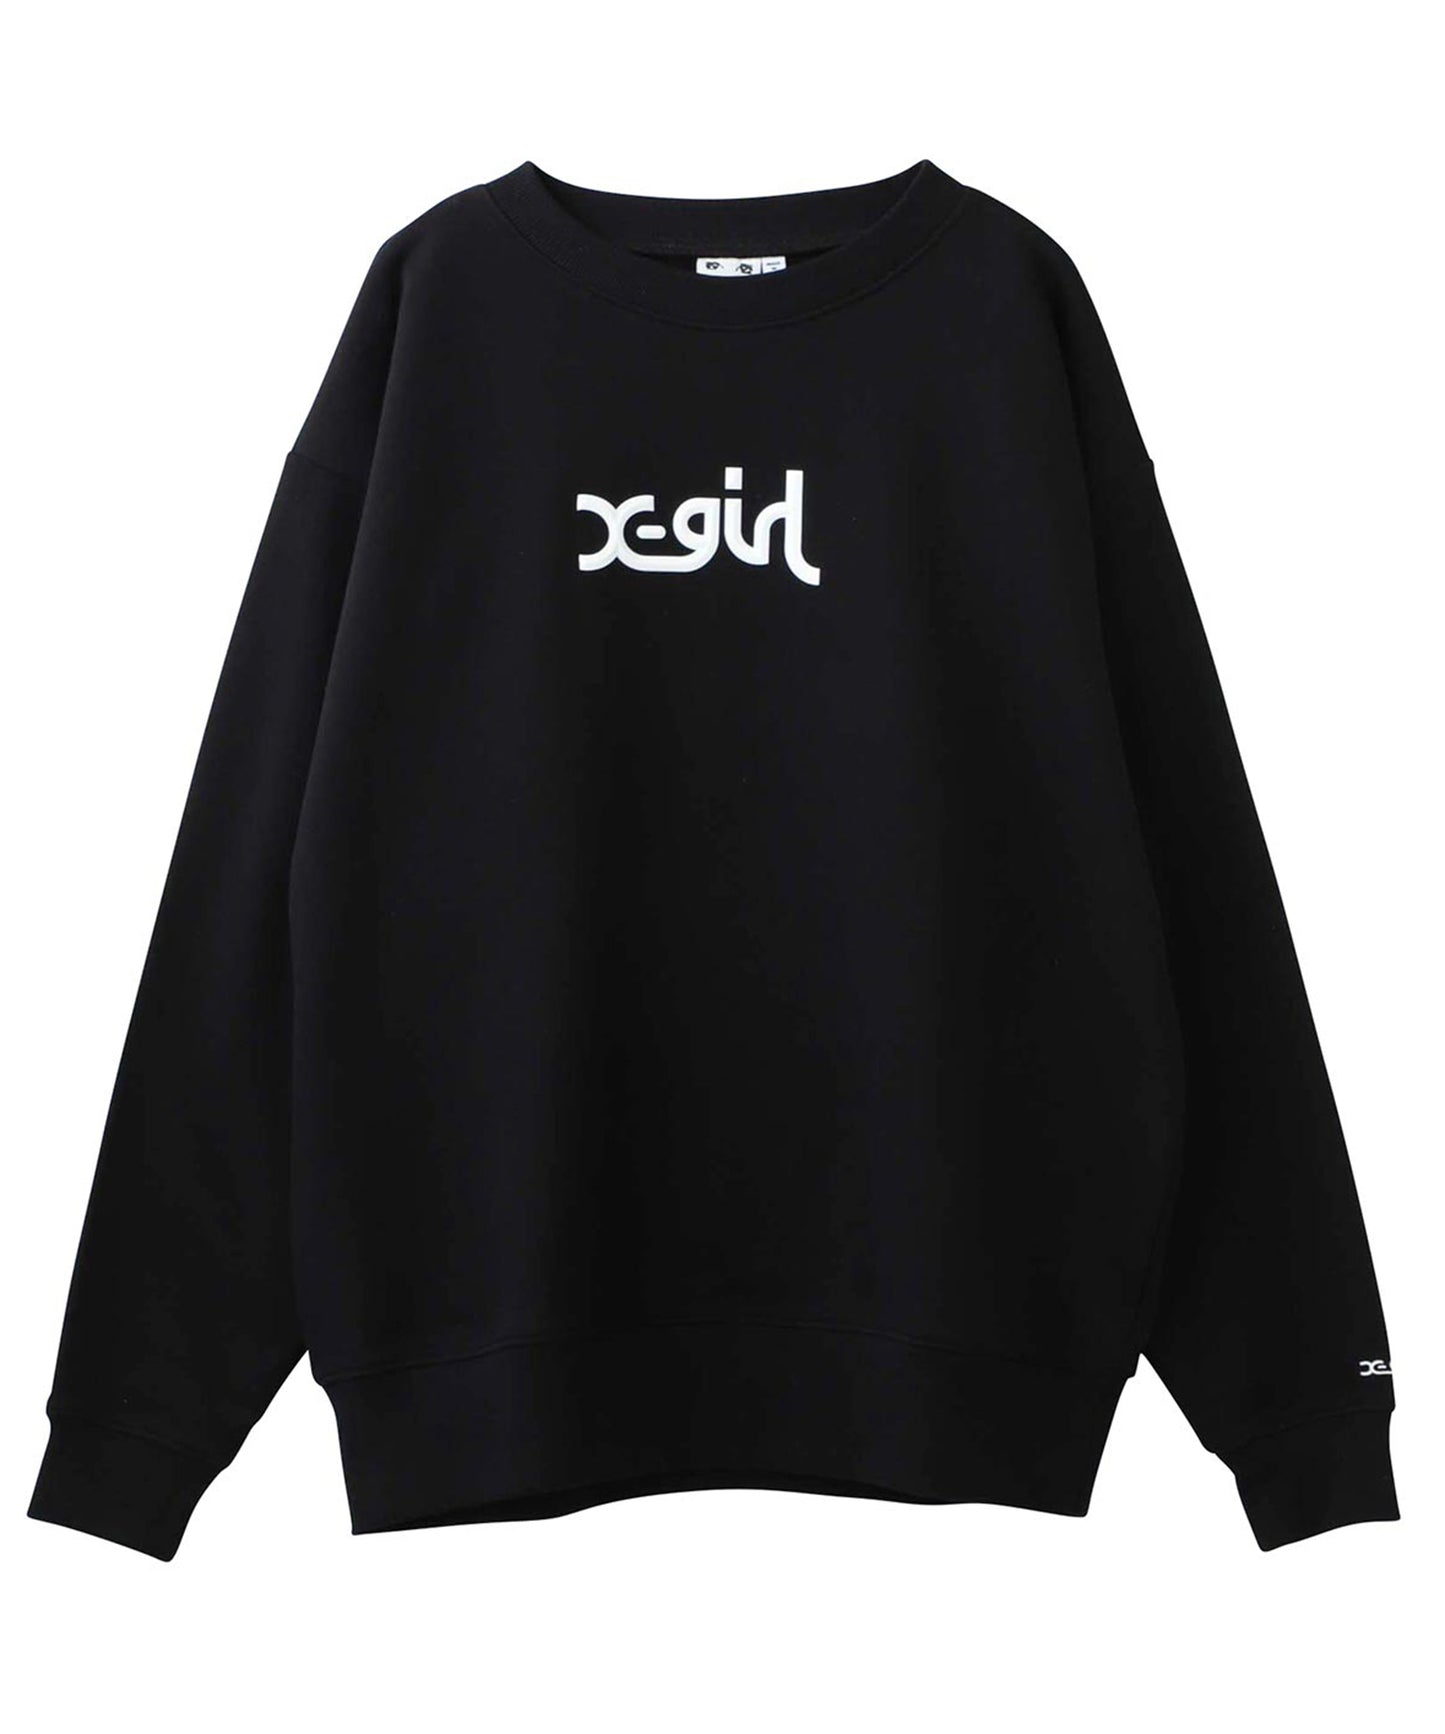 THICK RUBBER MILLS LOGO CREW SWEAT TOP